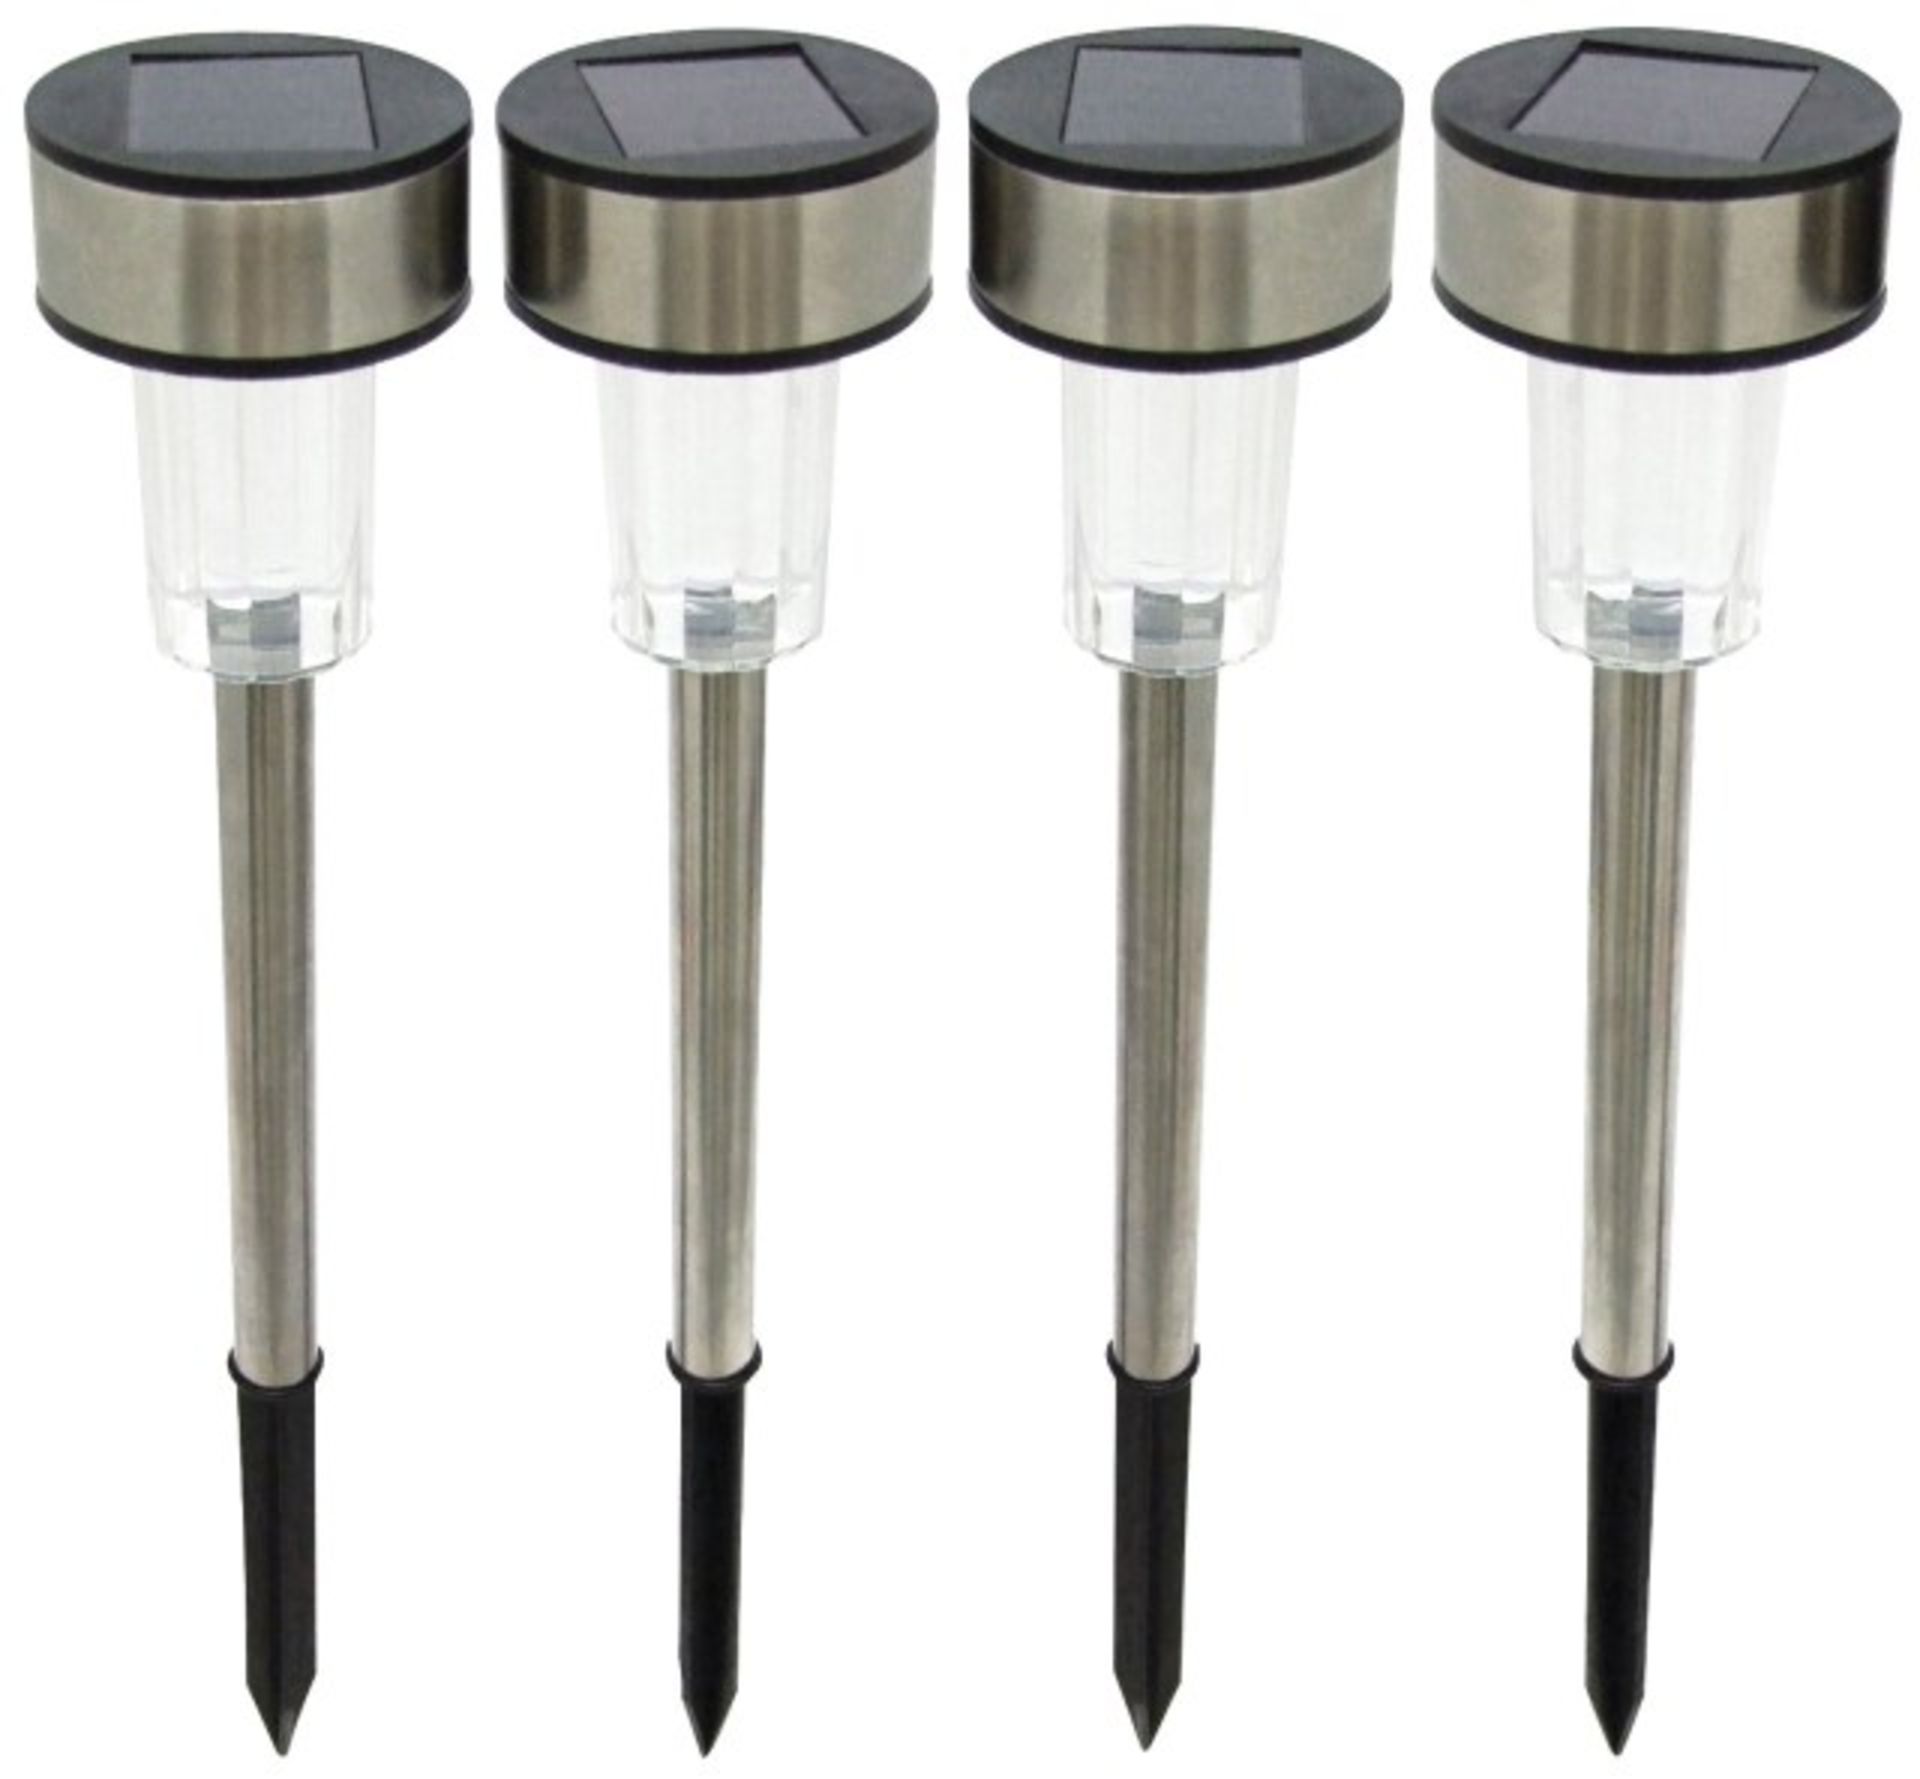 V Brand New Set Of 4 Kempton Stainless Steel Solar Lights X  2  Bid price to be multiplied by Two